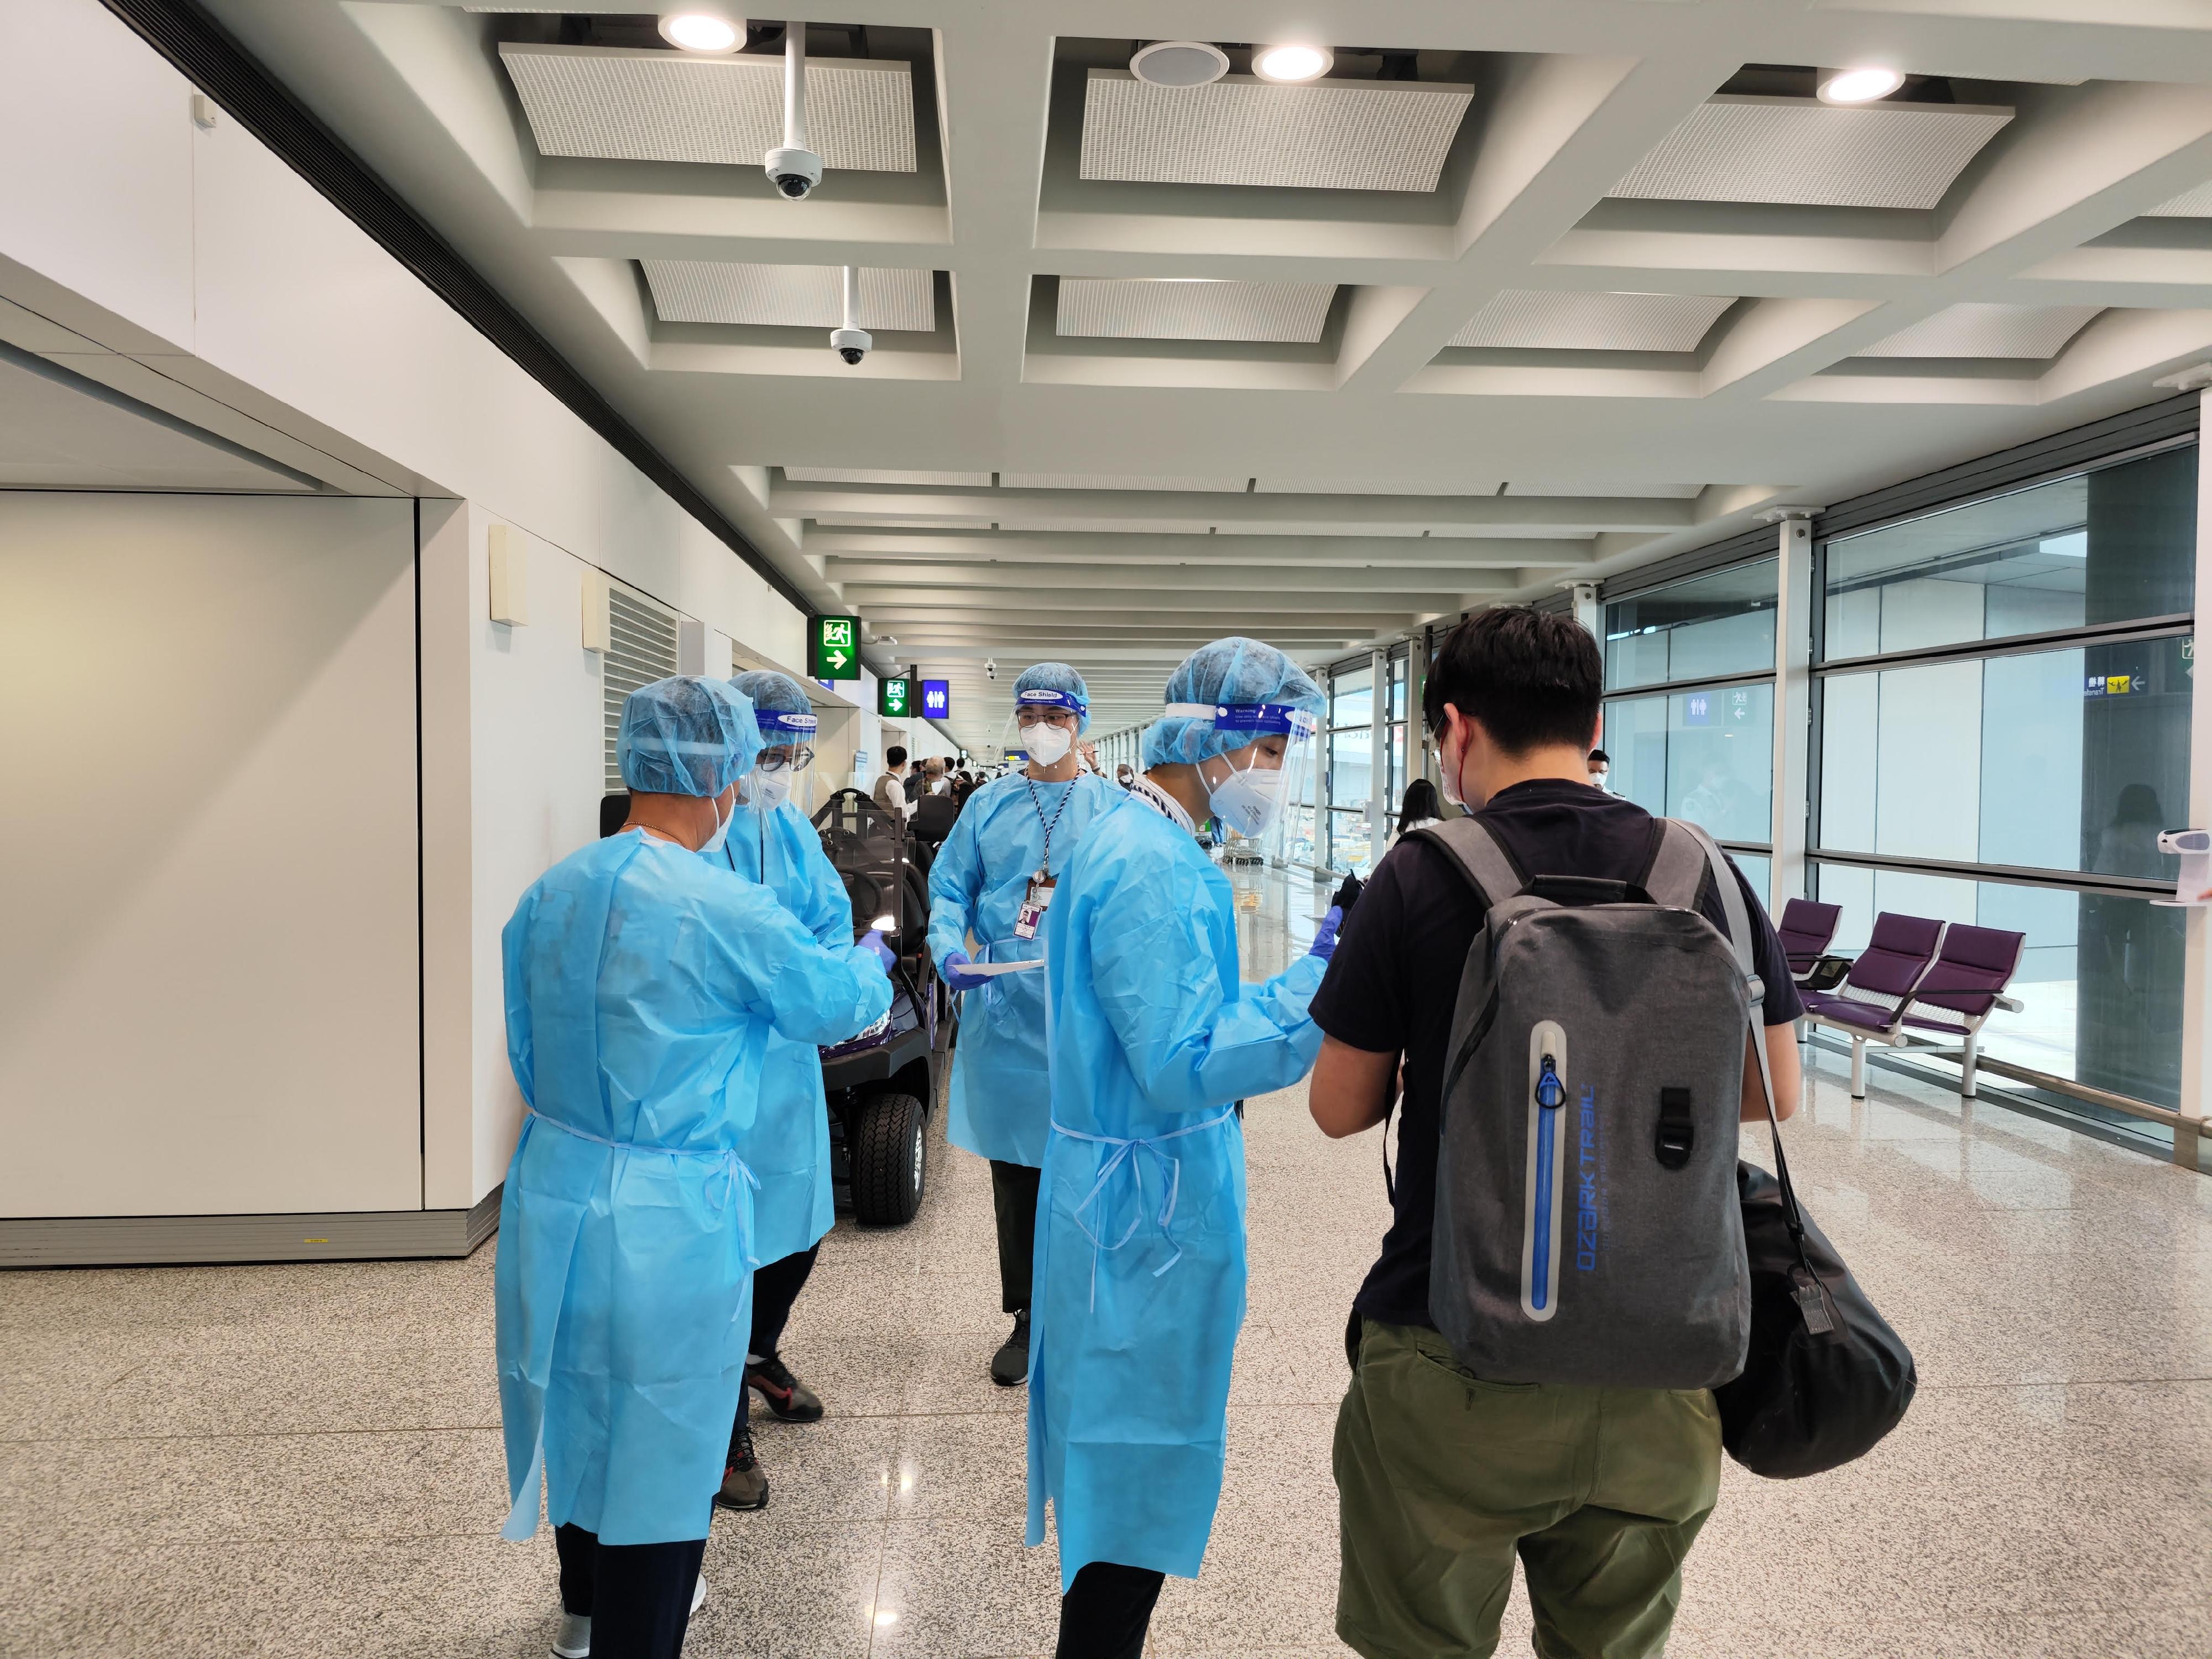 An assistance seeker safely arrived at Hong Kong International Airport today (August 28). Photo shows Immigration staff in protective equipment assisting the concerned assistance seeker to proceed to the designated counter to go through immigration clearance.